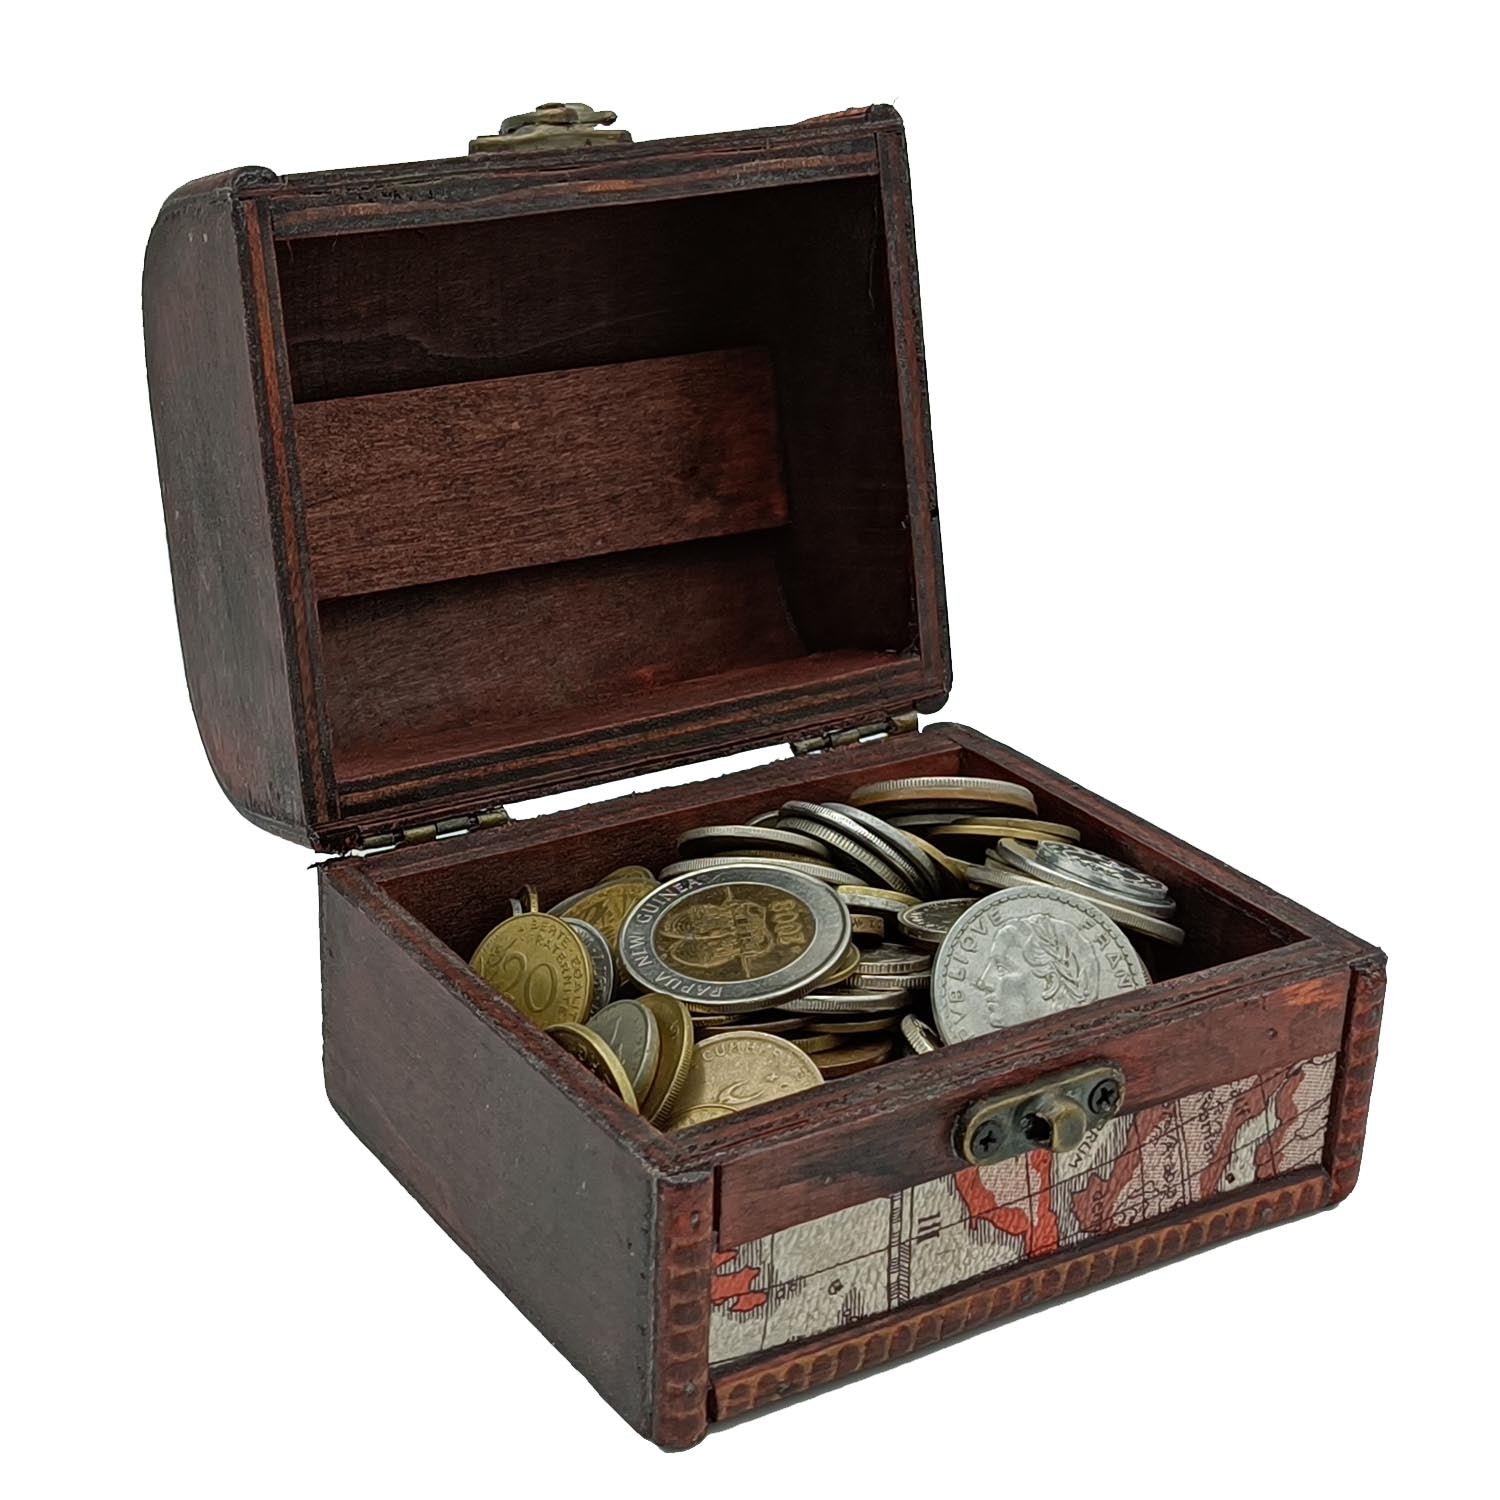  IMPACTO COLECCIONABLES Coin Collection - World Currency  Treasure Chest with 2Lb. - Collectible Circulated Coins - 4.7 x 3.5 x 3.5  Decorative Wooden Box - Antique Coins for Collectors (COA Included) : Toys  & Games